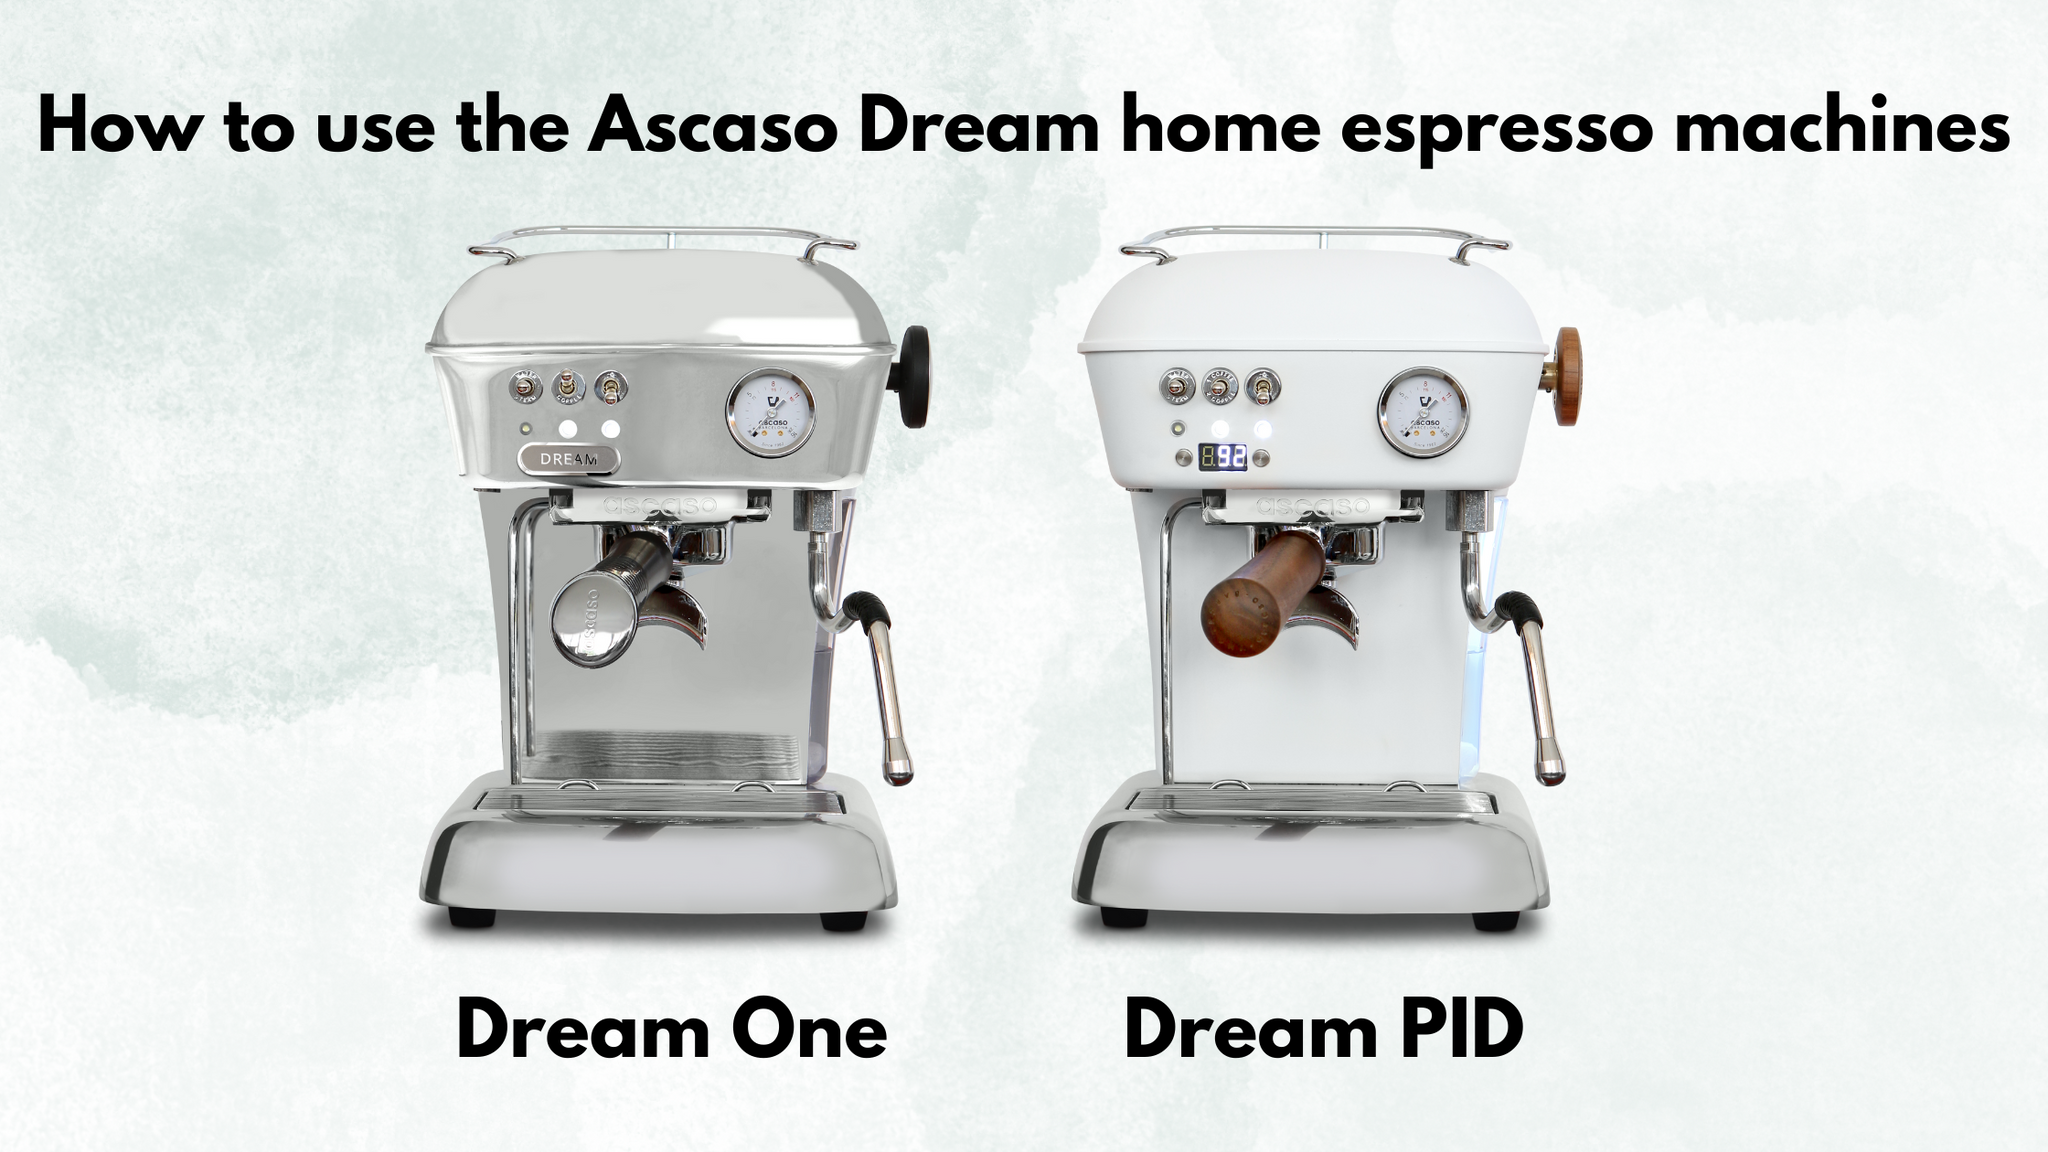 How to use the Ascaso Dream One and Dream PID